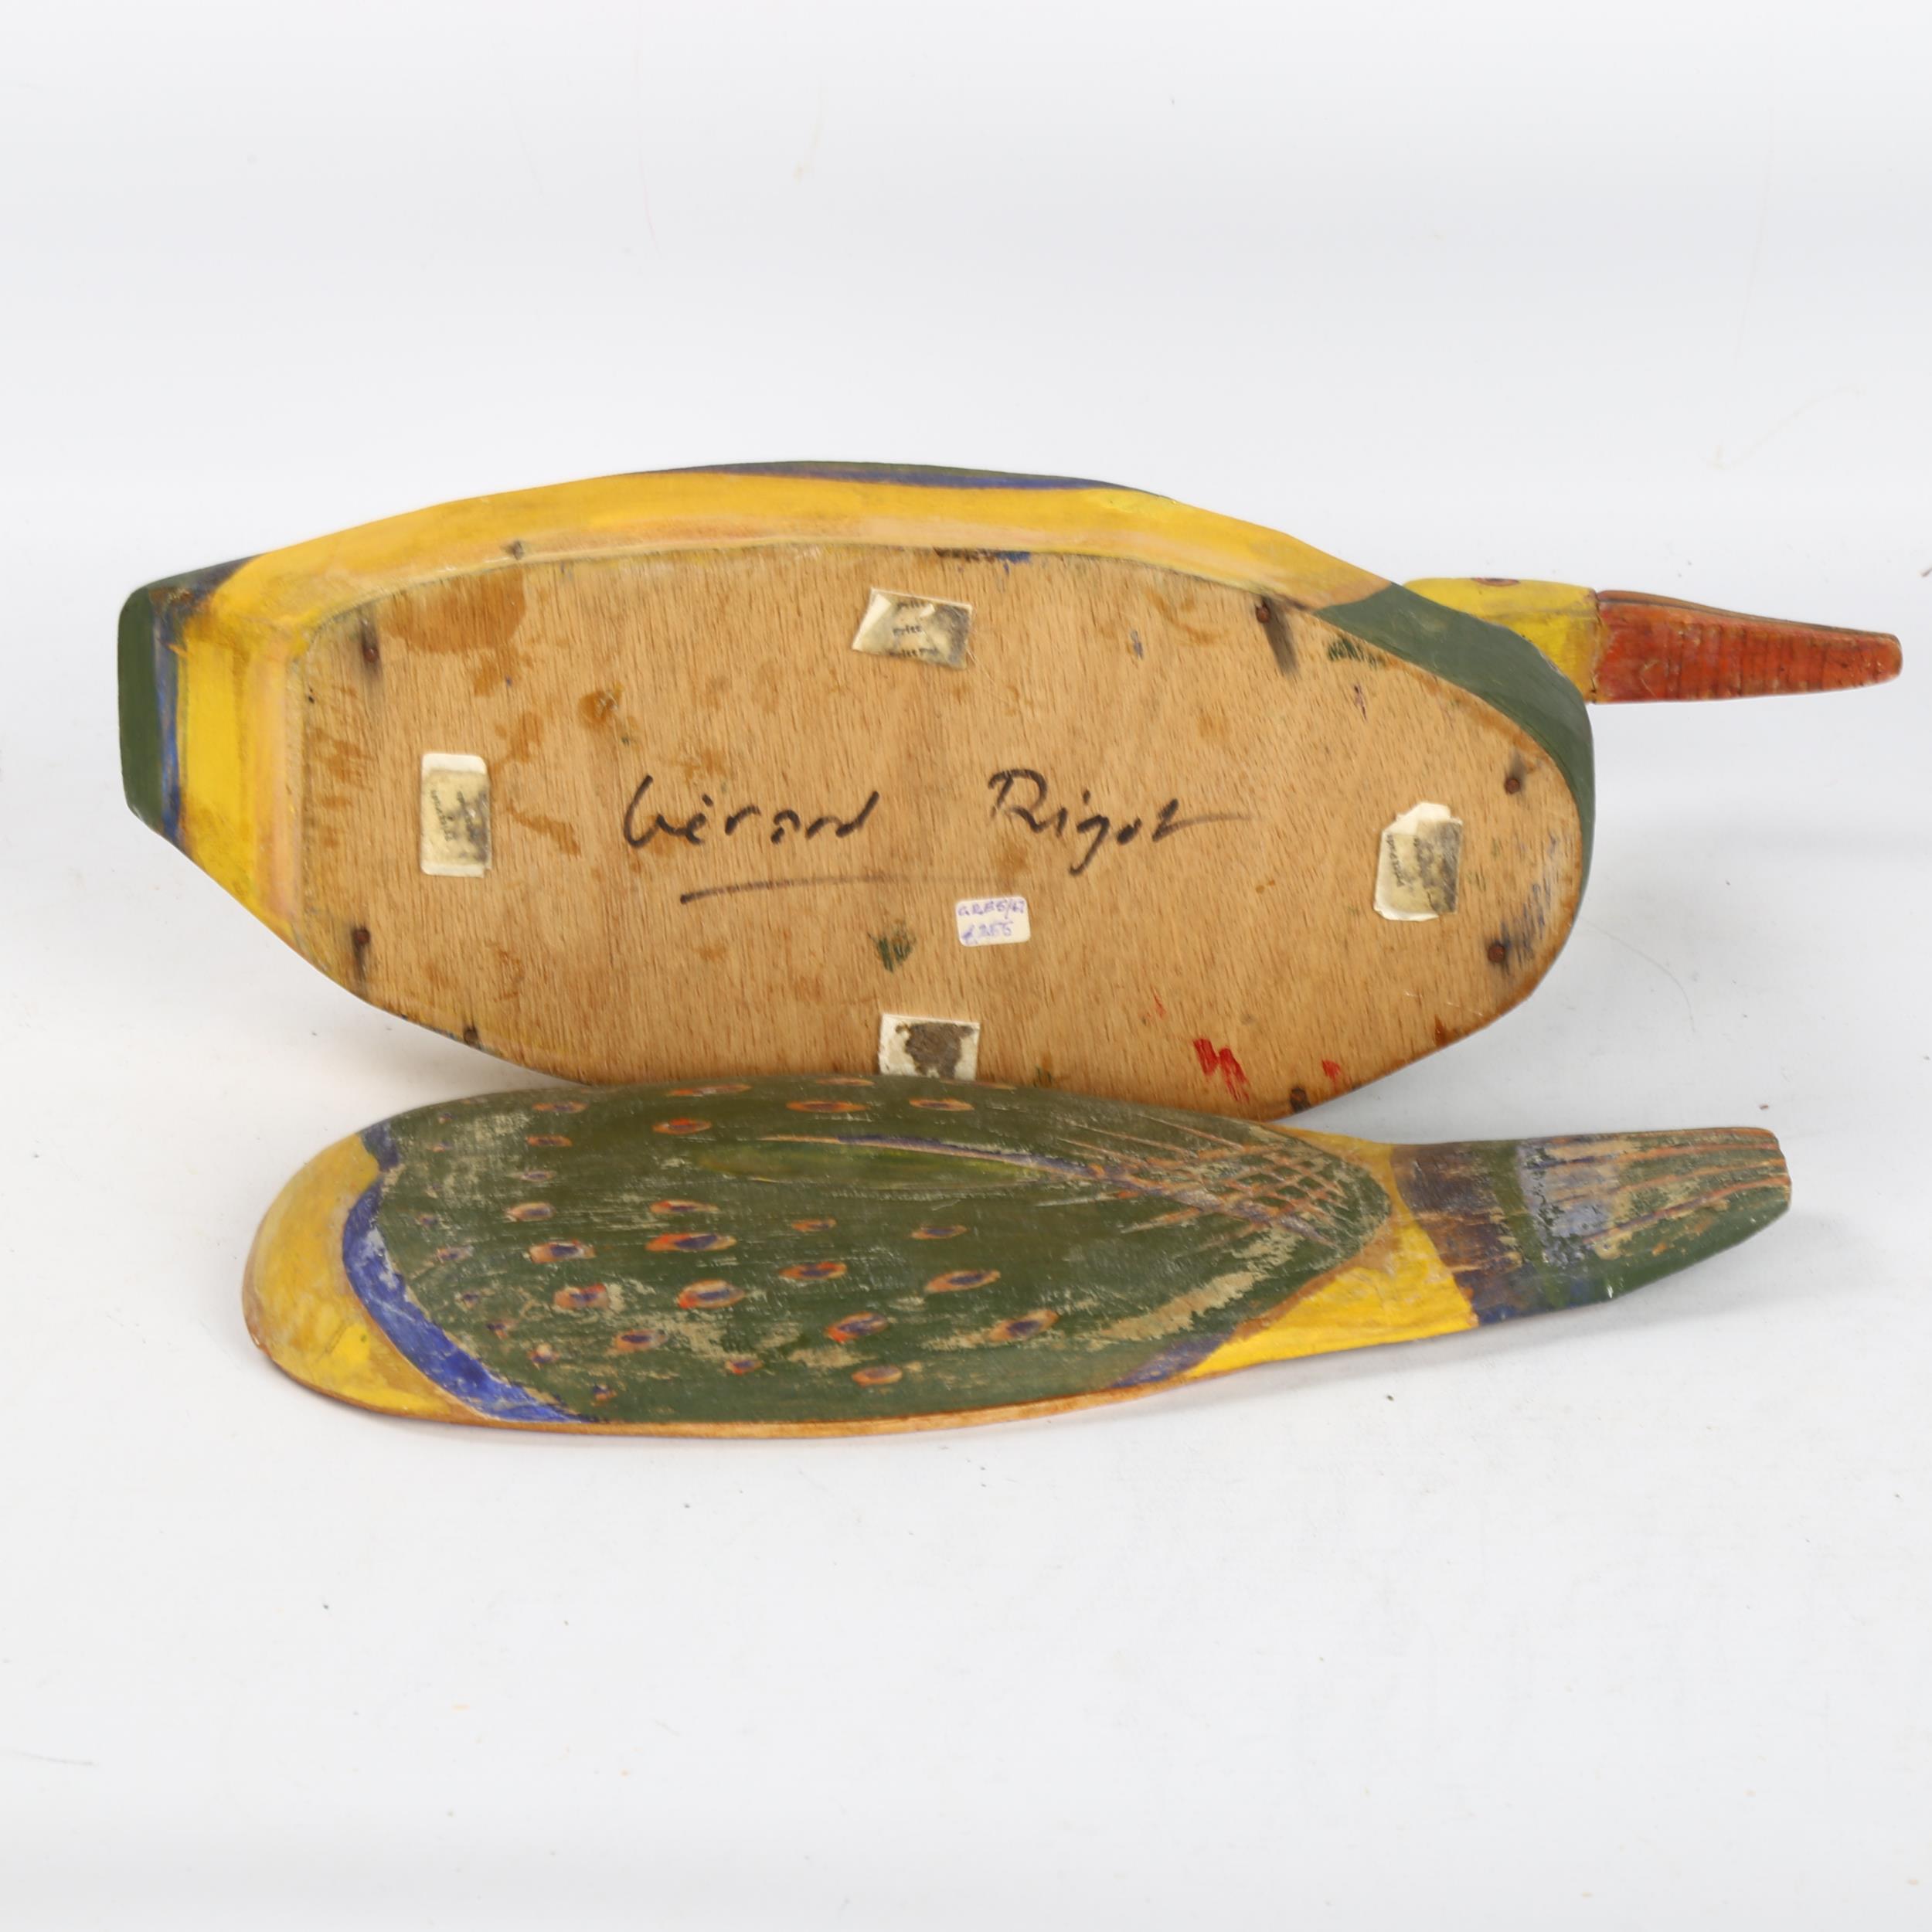 Gerard Rigot (b1929), a wooden hand carved and painted box in duck form, signed to base, length 38cm - Image 3 of 3